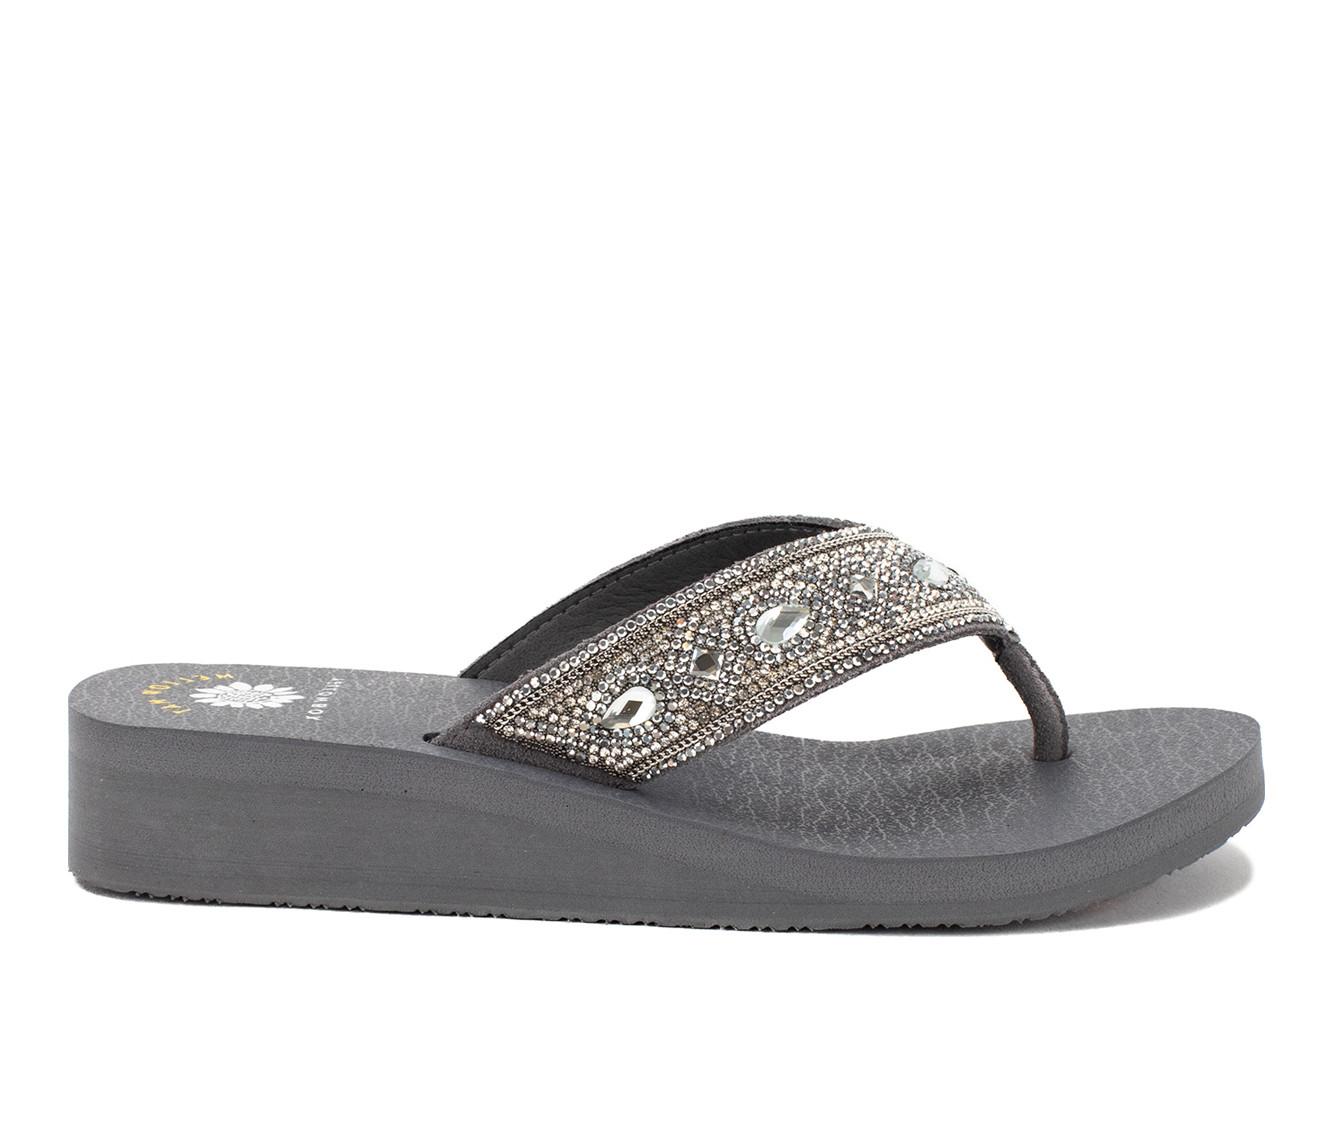 Sandals Flip Flops By Yellow Box Size: 10